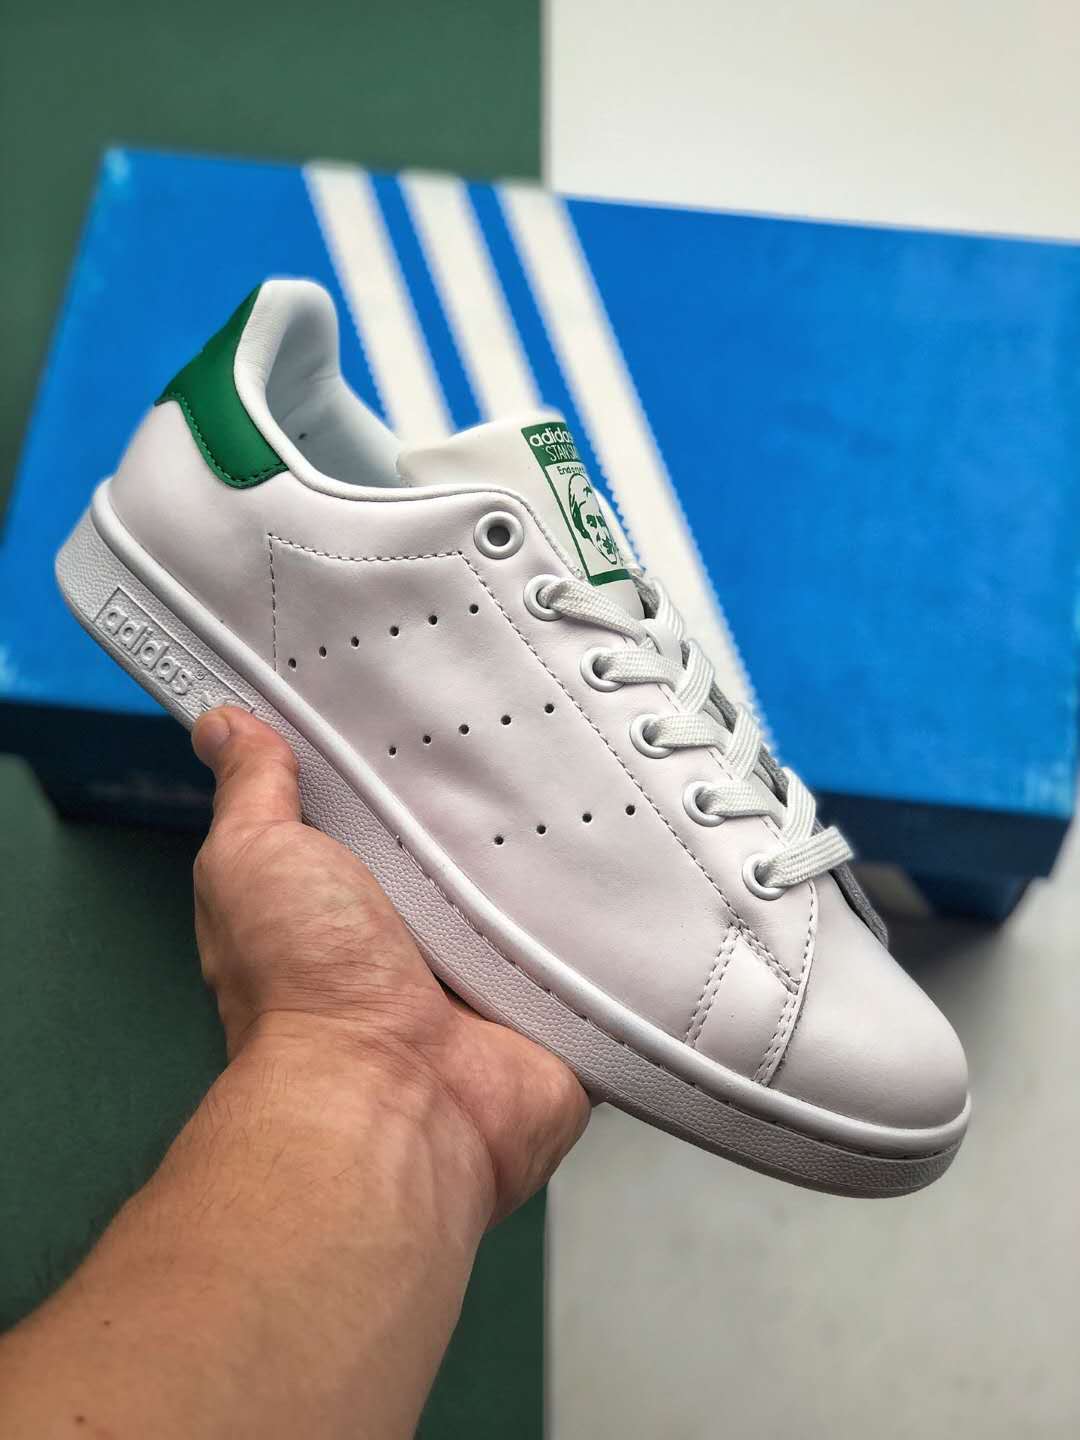 Adidas Stan Smith Fairway M20324 - Classic Sneakers for Men and Women